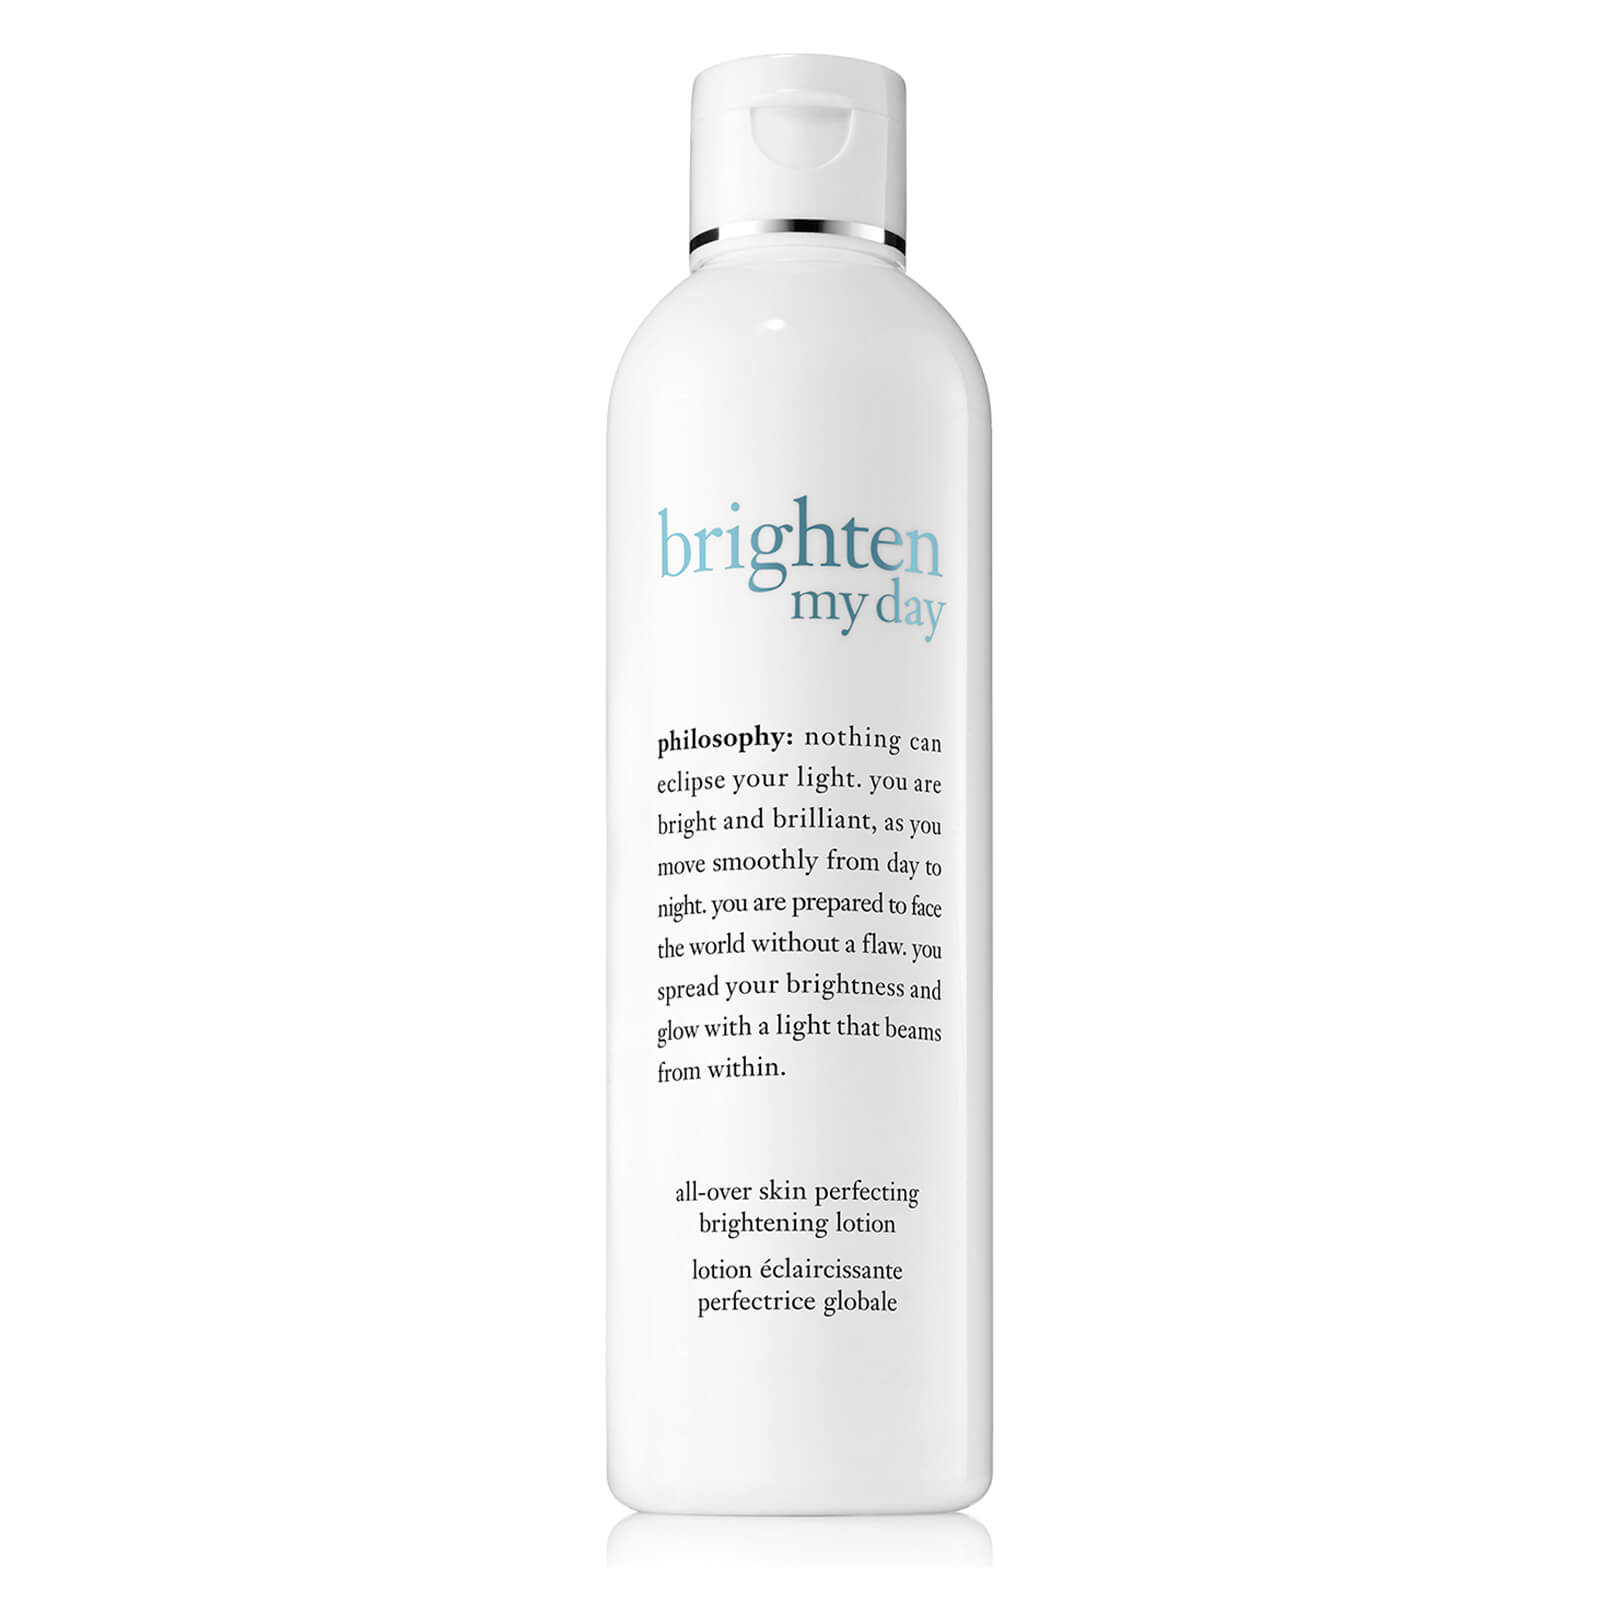 philosophy Brighten My Day All-Over Skin Perfecting Brightening Lotion 240ml